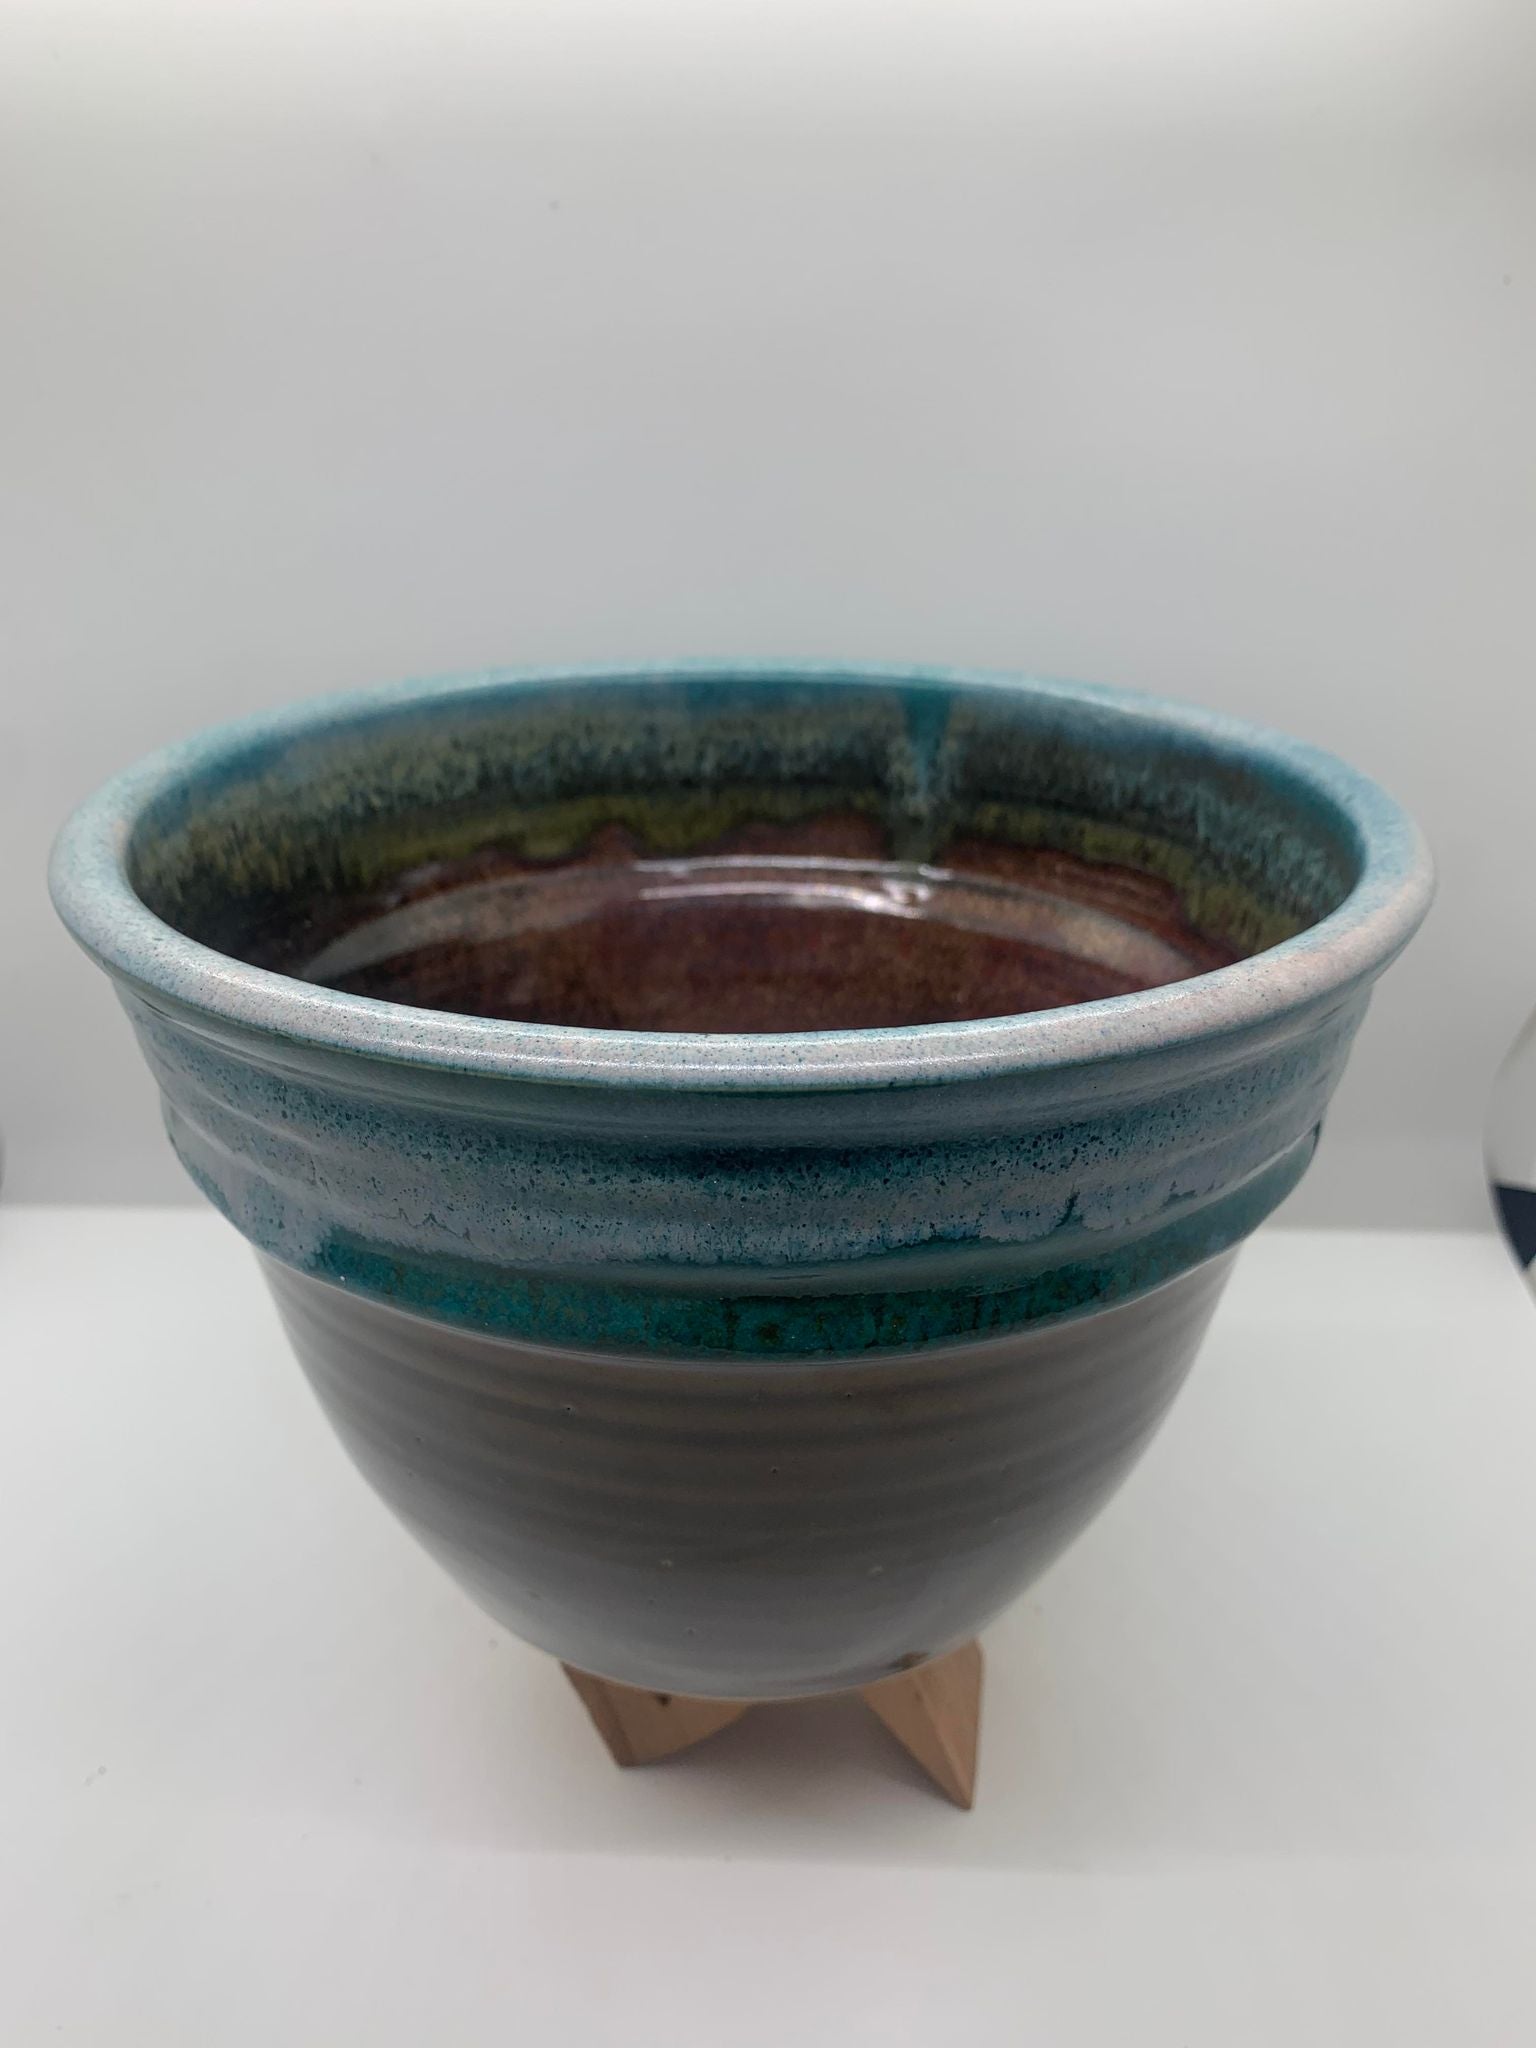 A blue and green Perry Munn Pottery Mixing Bowl on a wooden stand.